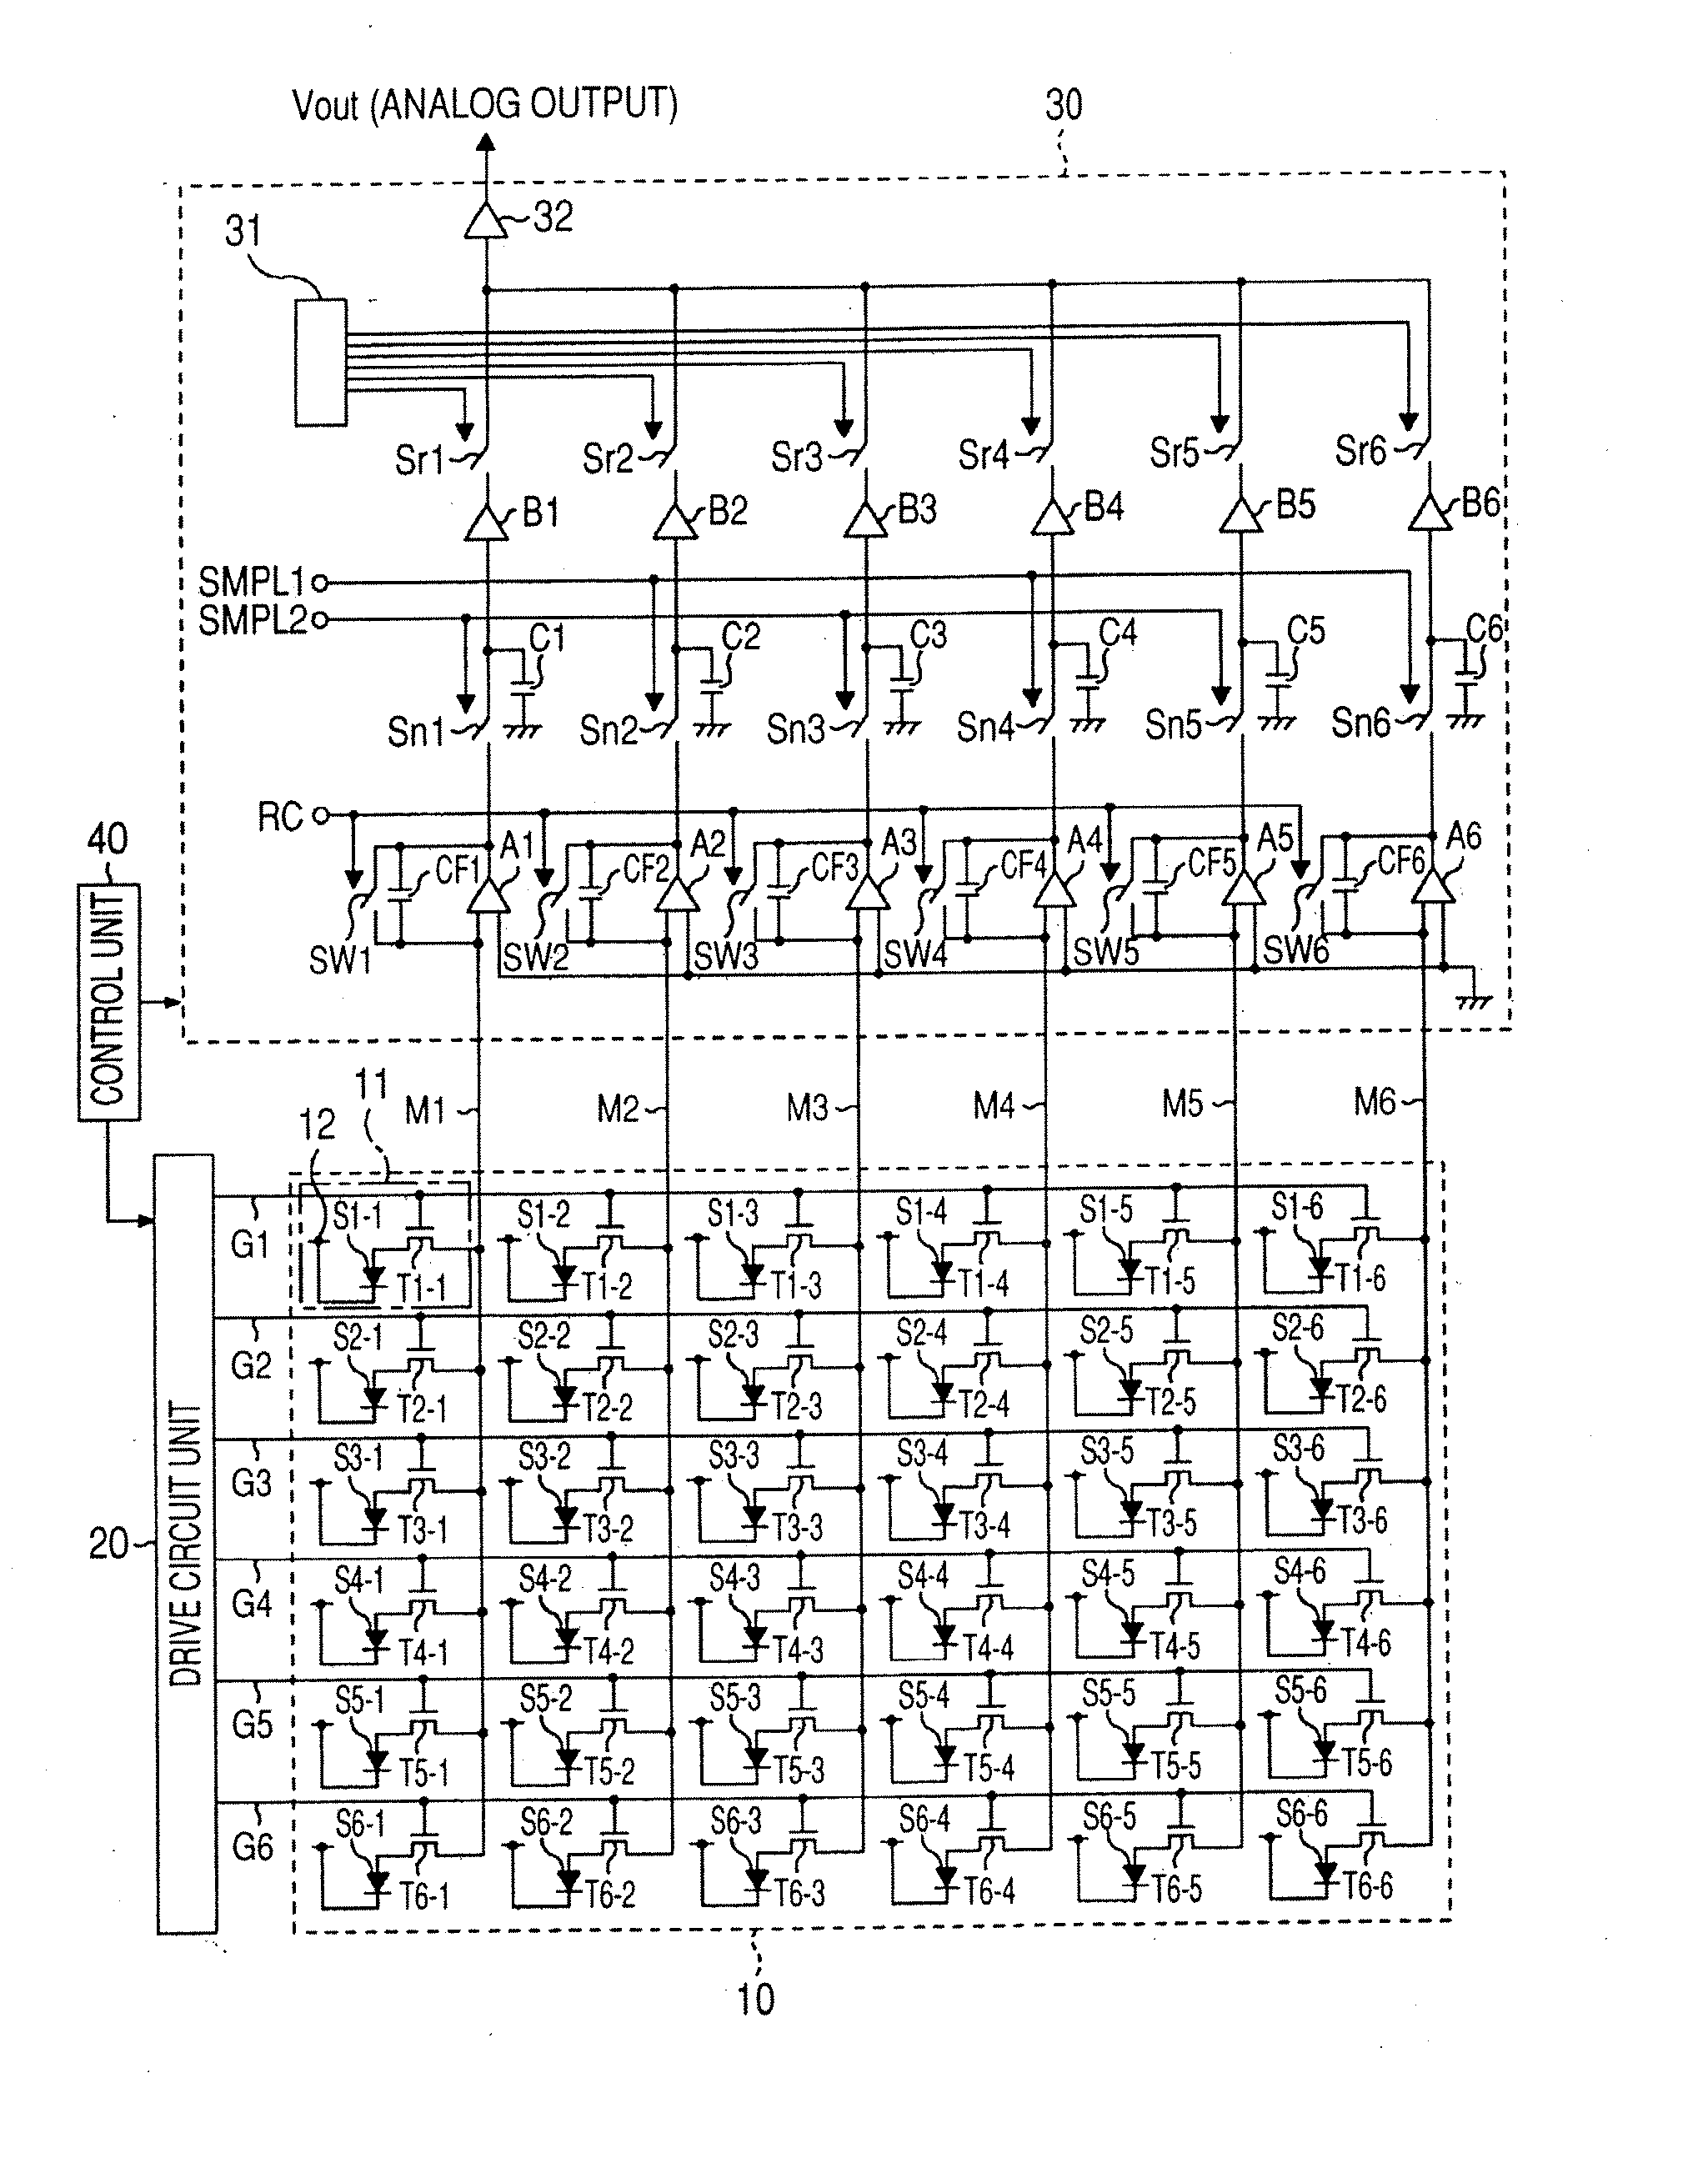 Imaging apparatus, method for driving the same and radiation imaging system